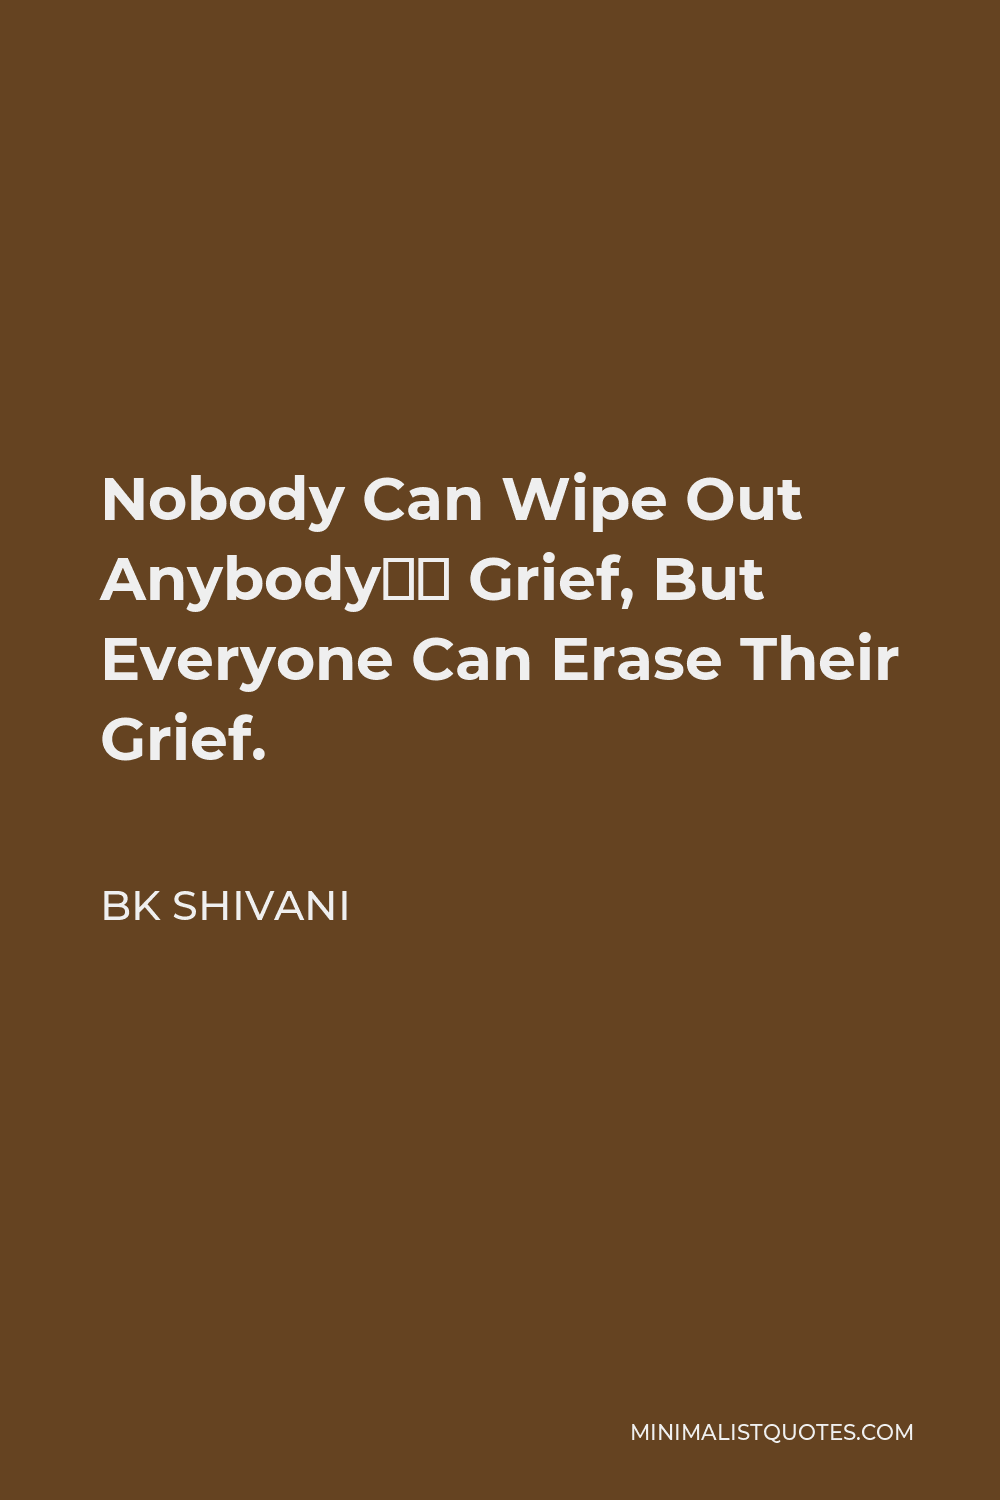 BK Shivani Quote - Nobody Can Wipe Out Anybody’s Grief, But Everyone Can Erase Their Grief.